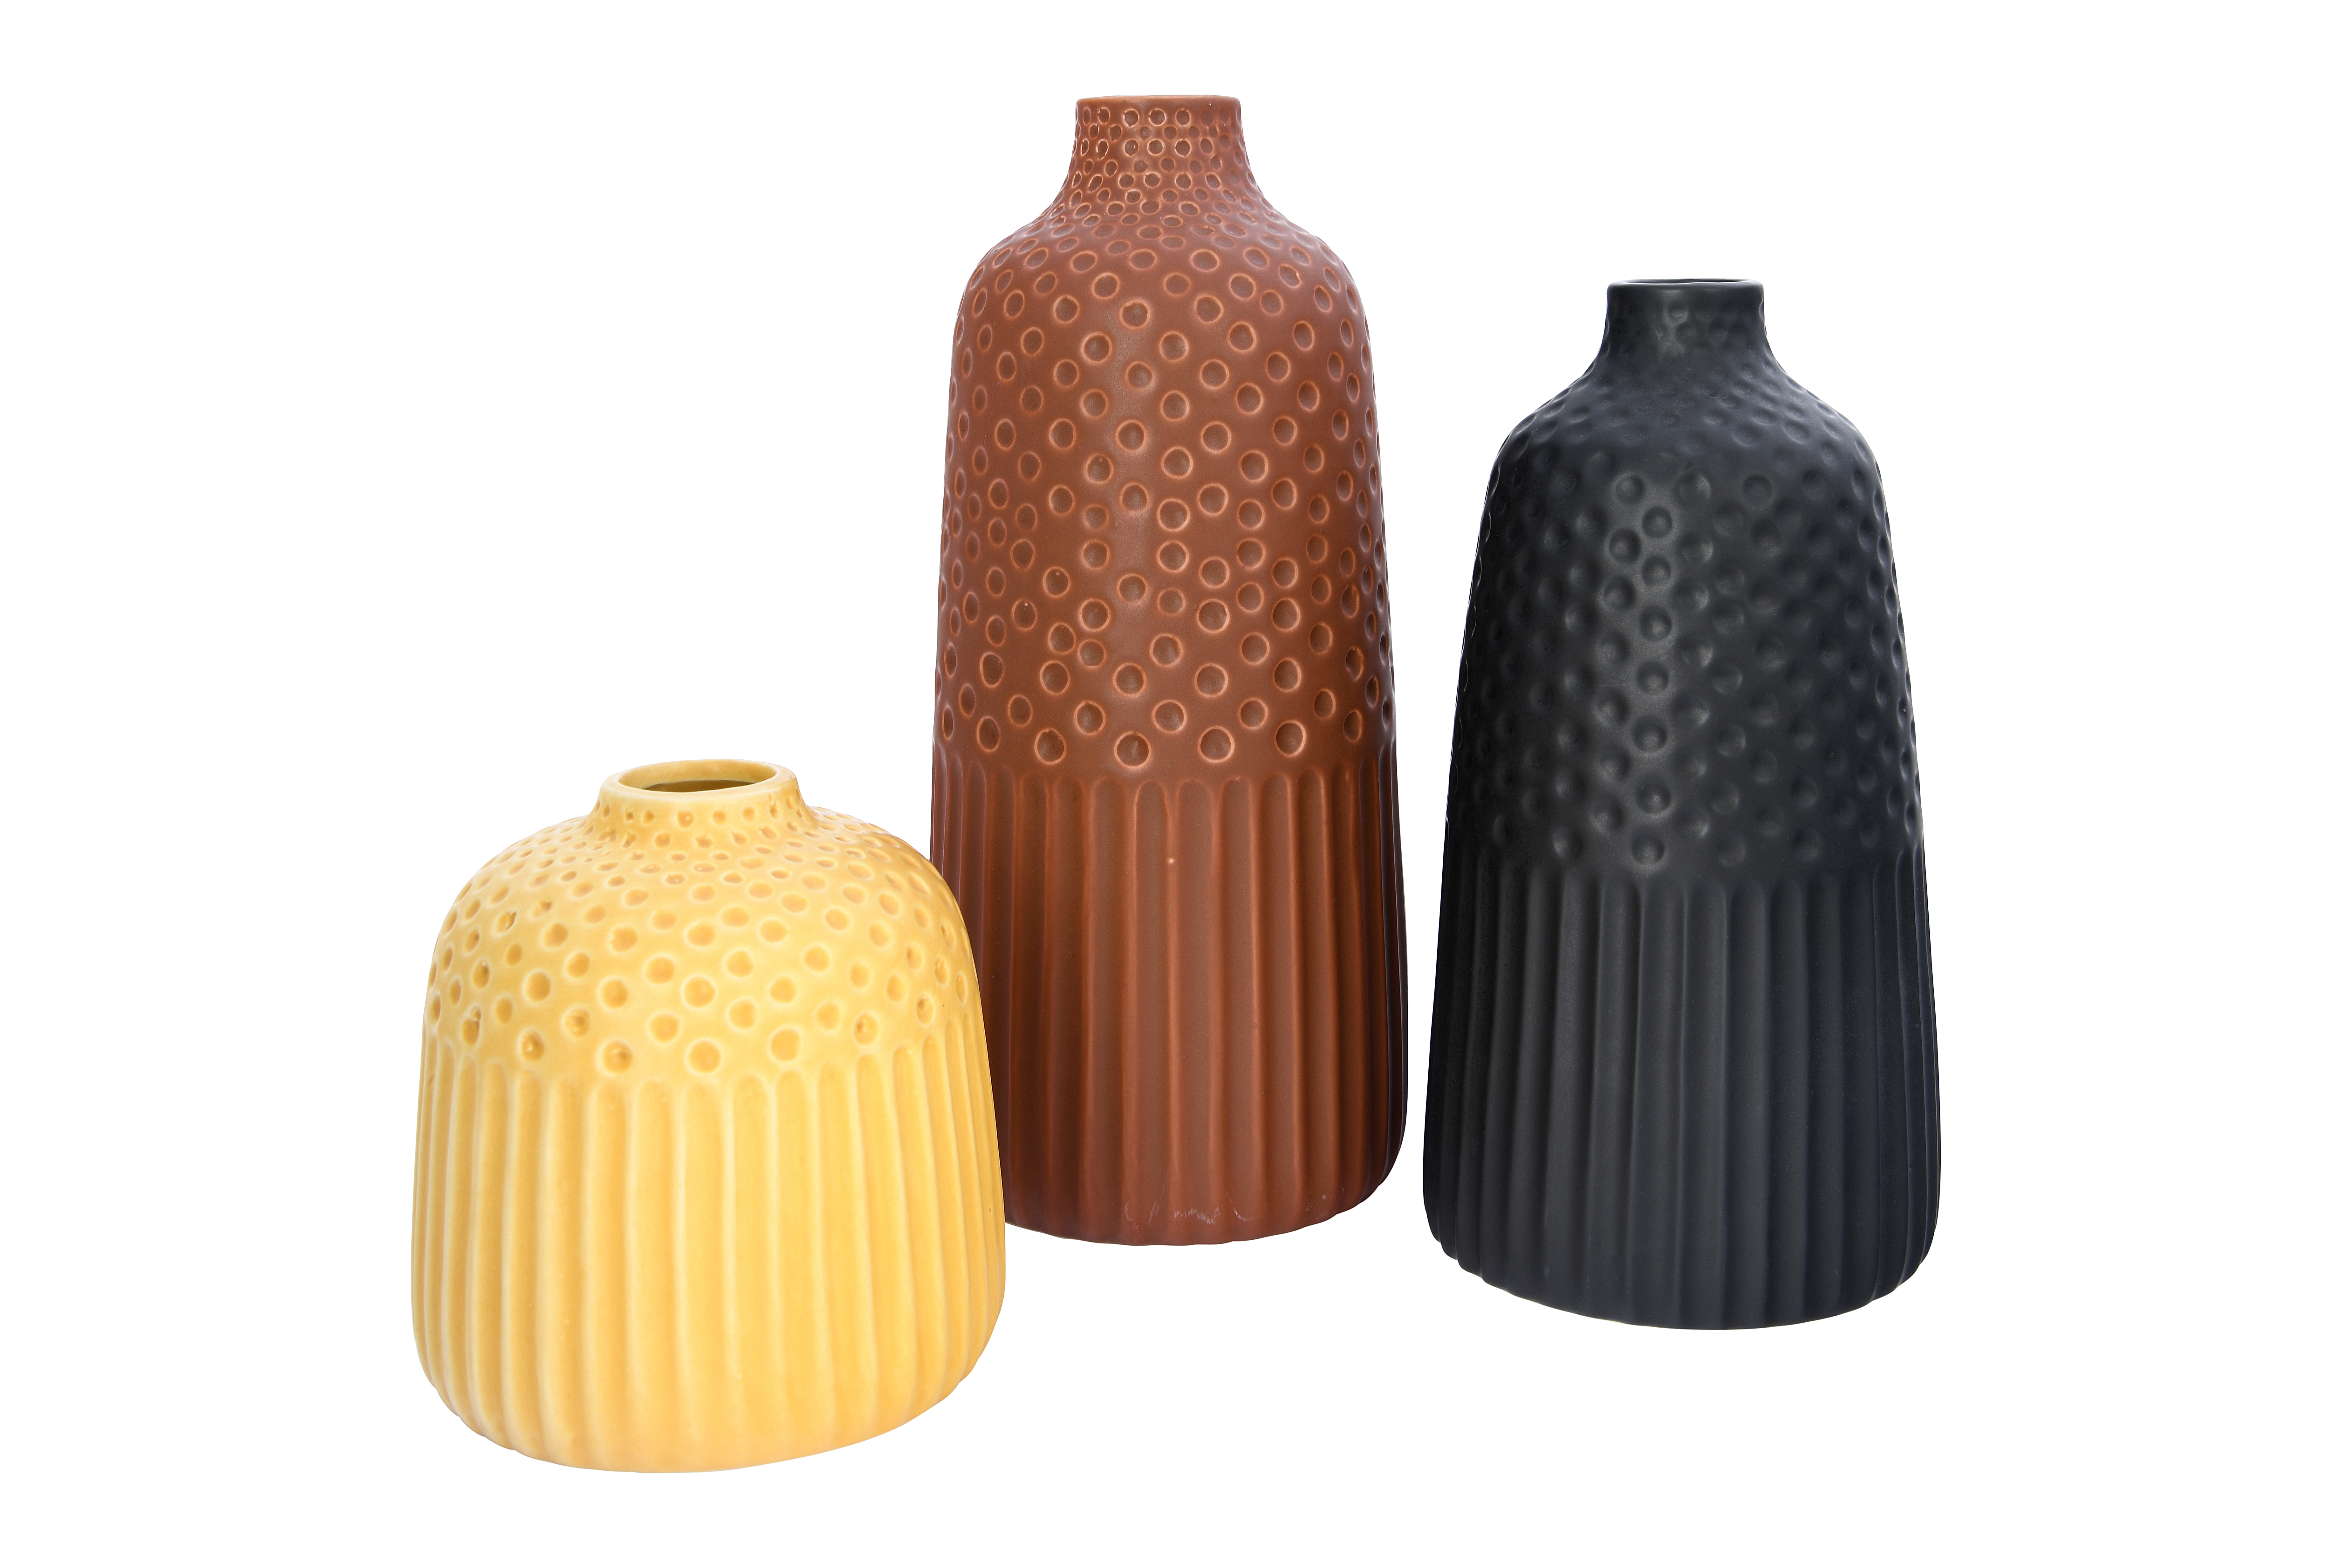 Embossed Stoneware Vases with Fluted & Polka Dot Designs (Set of 3 Sizes/Colors) - Image 0